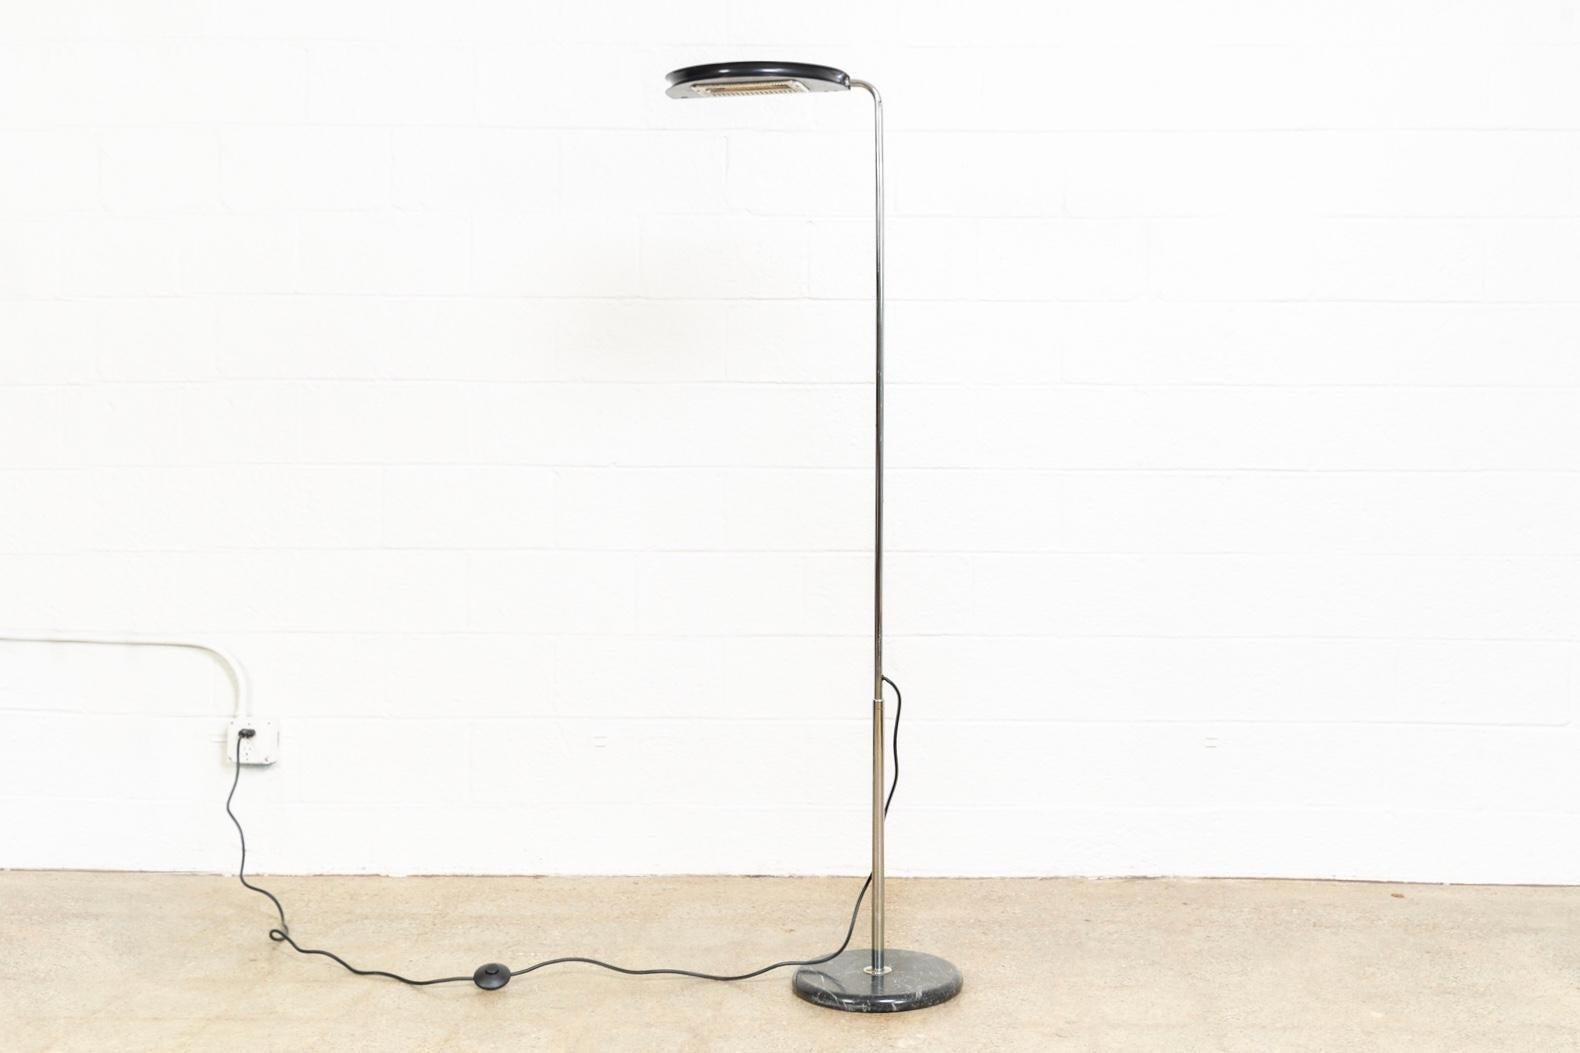 This vintage mid century Modern Bruno Gecchelin “Mezzaluna“ black floor lamp was manufactured by Skipper and made in Italy circa 1970. The sleek, Space Age, modernist design features a black Carrara marble base with a chrome-plated steel tubular